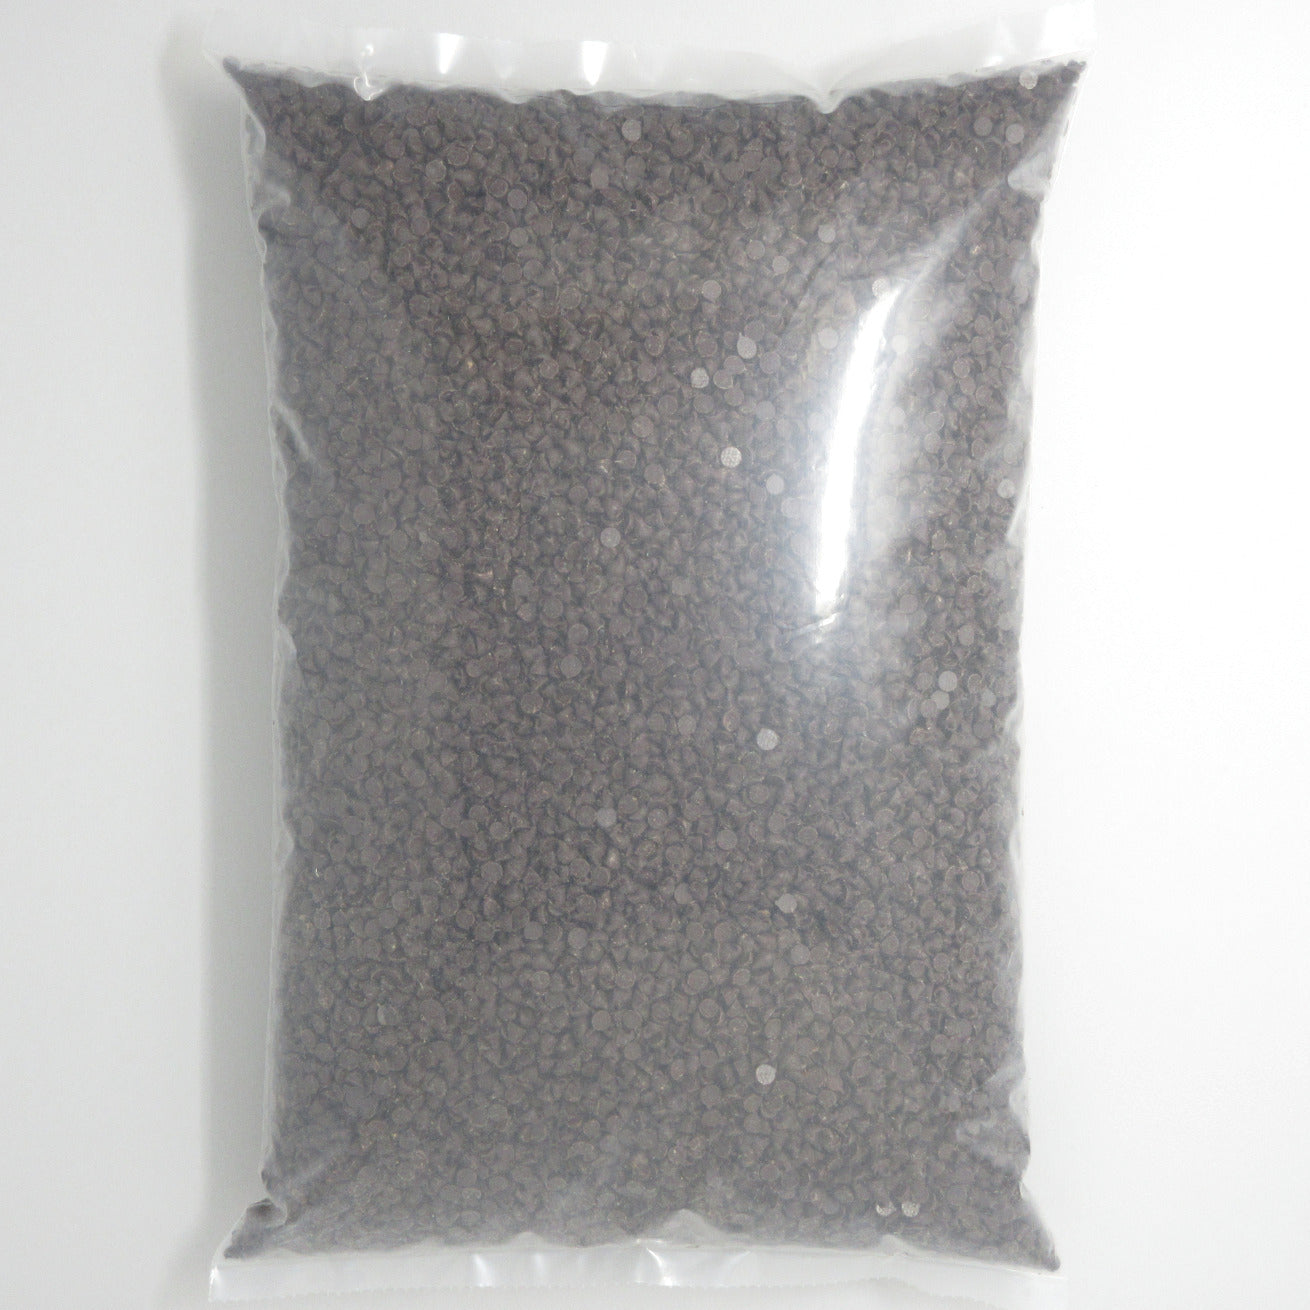 Flour Barrel product image - Chocolate Chips Small